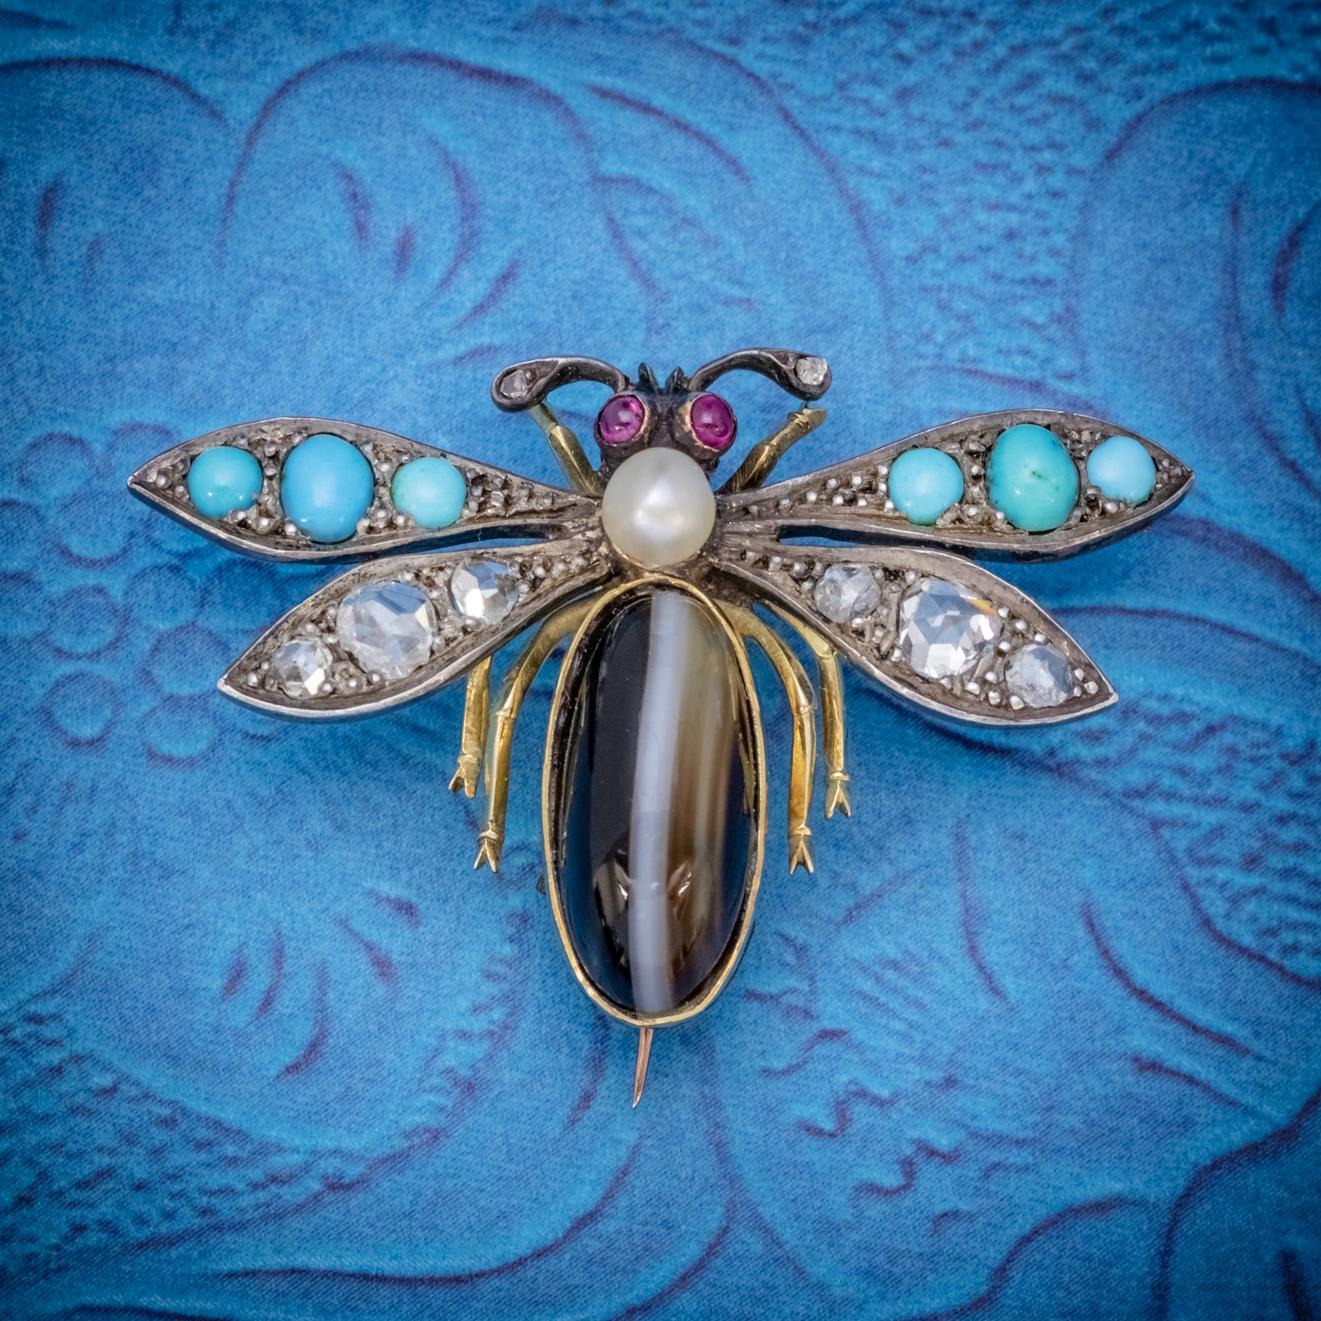 A fabulous Antique Victorian winged insect brooch set with a beautiful polished bullseye Agate abdomen leading to Turquoise and Rose cut Diamond encrusted wings, Ruby set eyes and topped with a lustrous Pearl in the centre. 

The Piece is